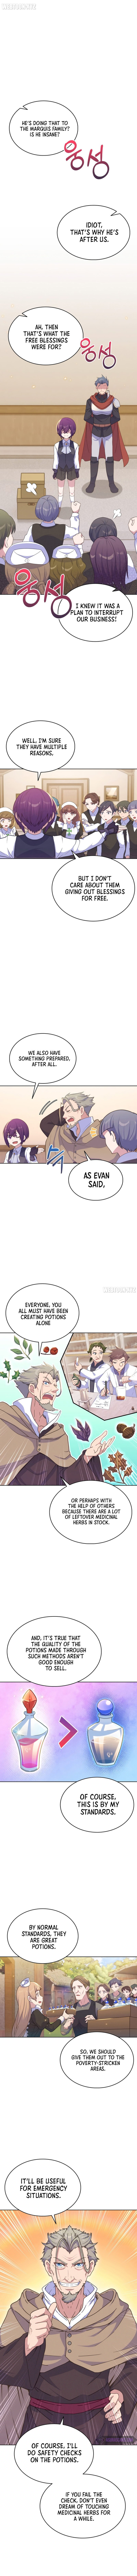 never-die-extra-chap-23-2